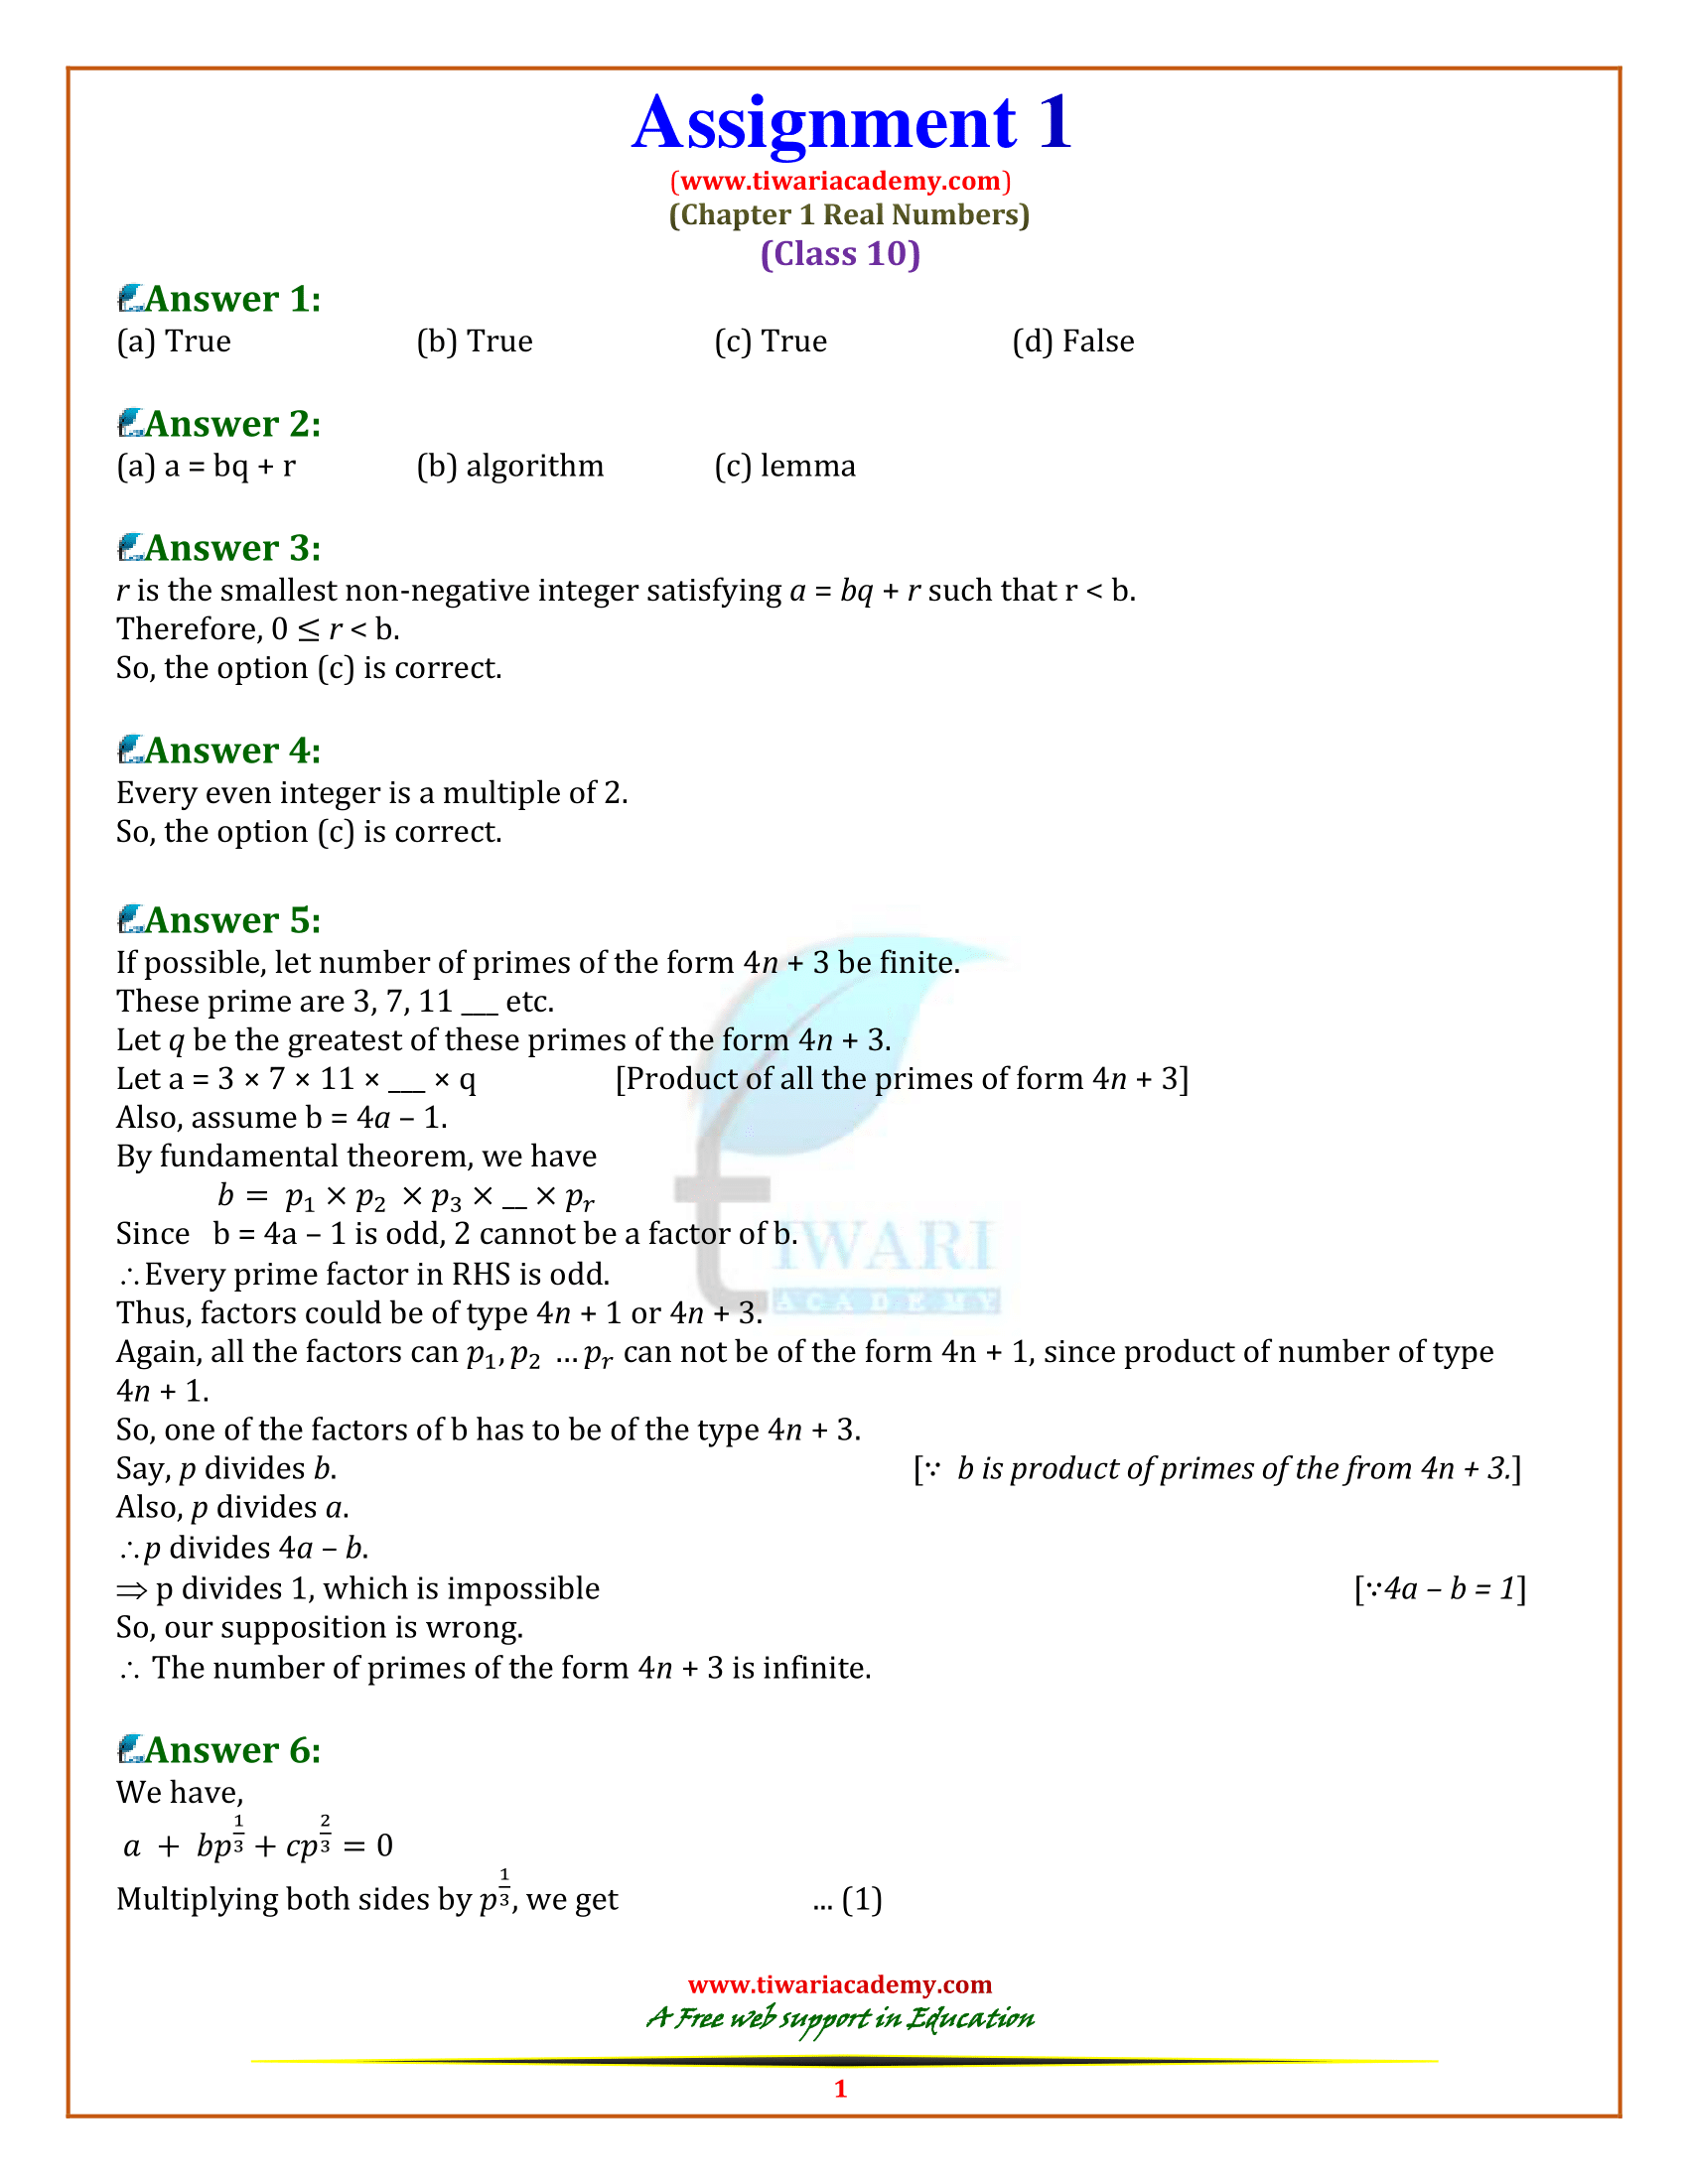 Assignments for Class 10 Maths Chapter 1